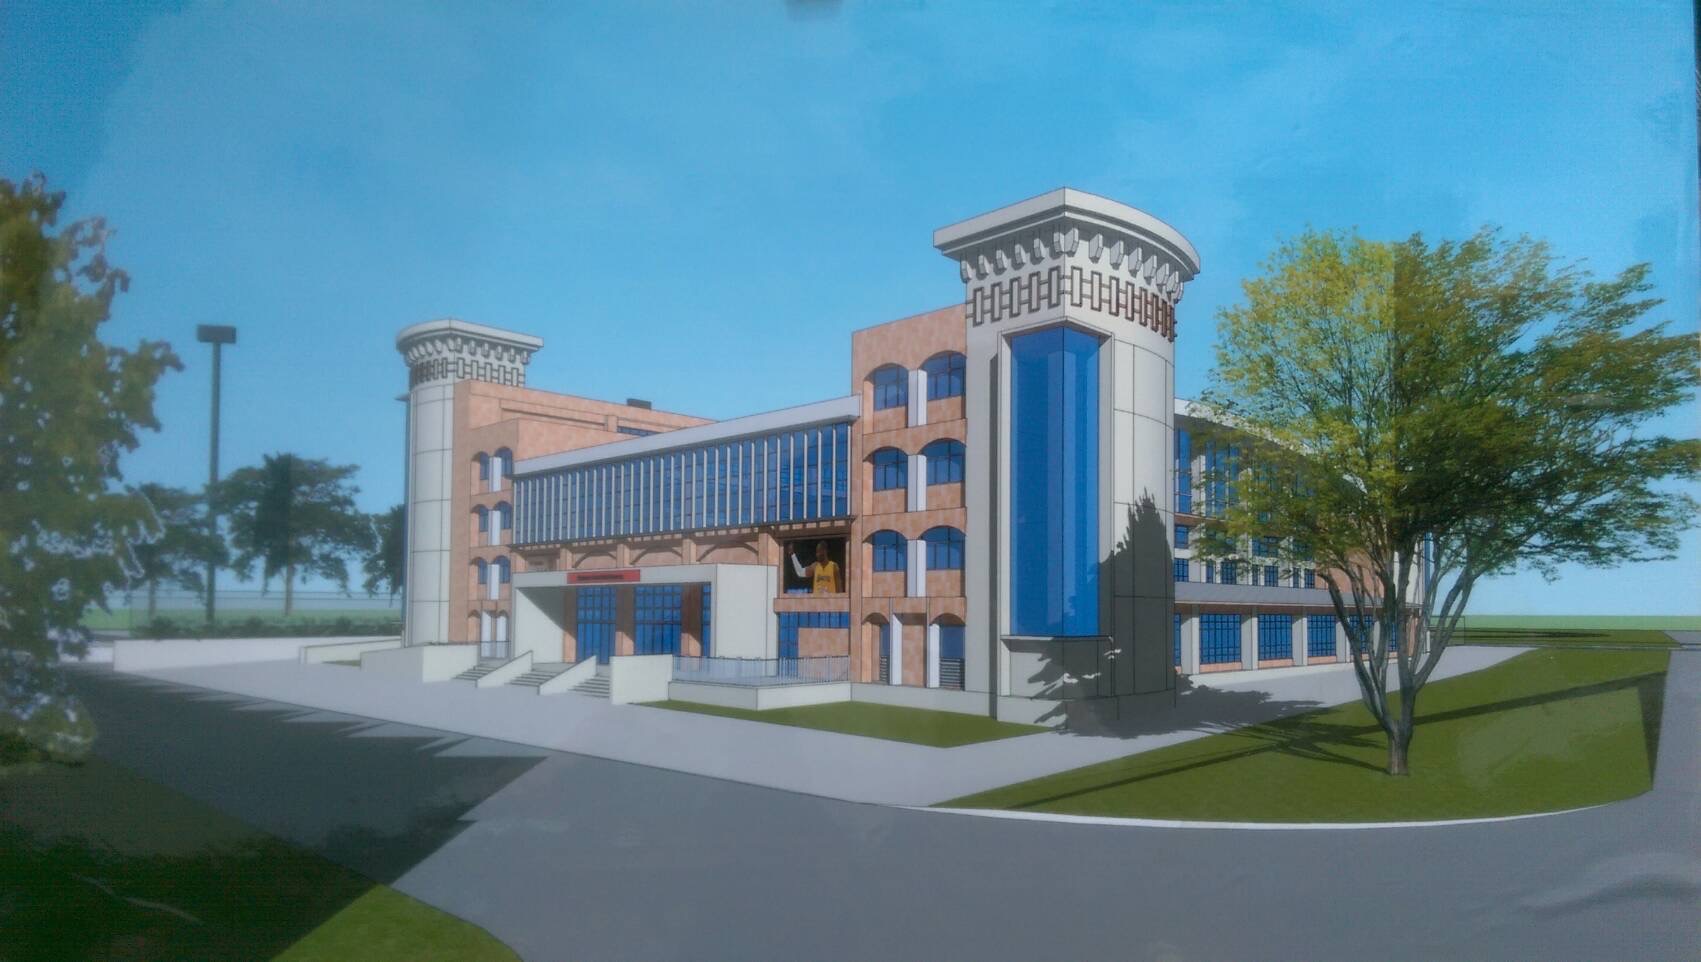 Groundbreaking on August 1 for New Student Union and Sports Center